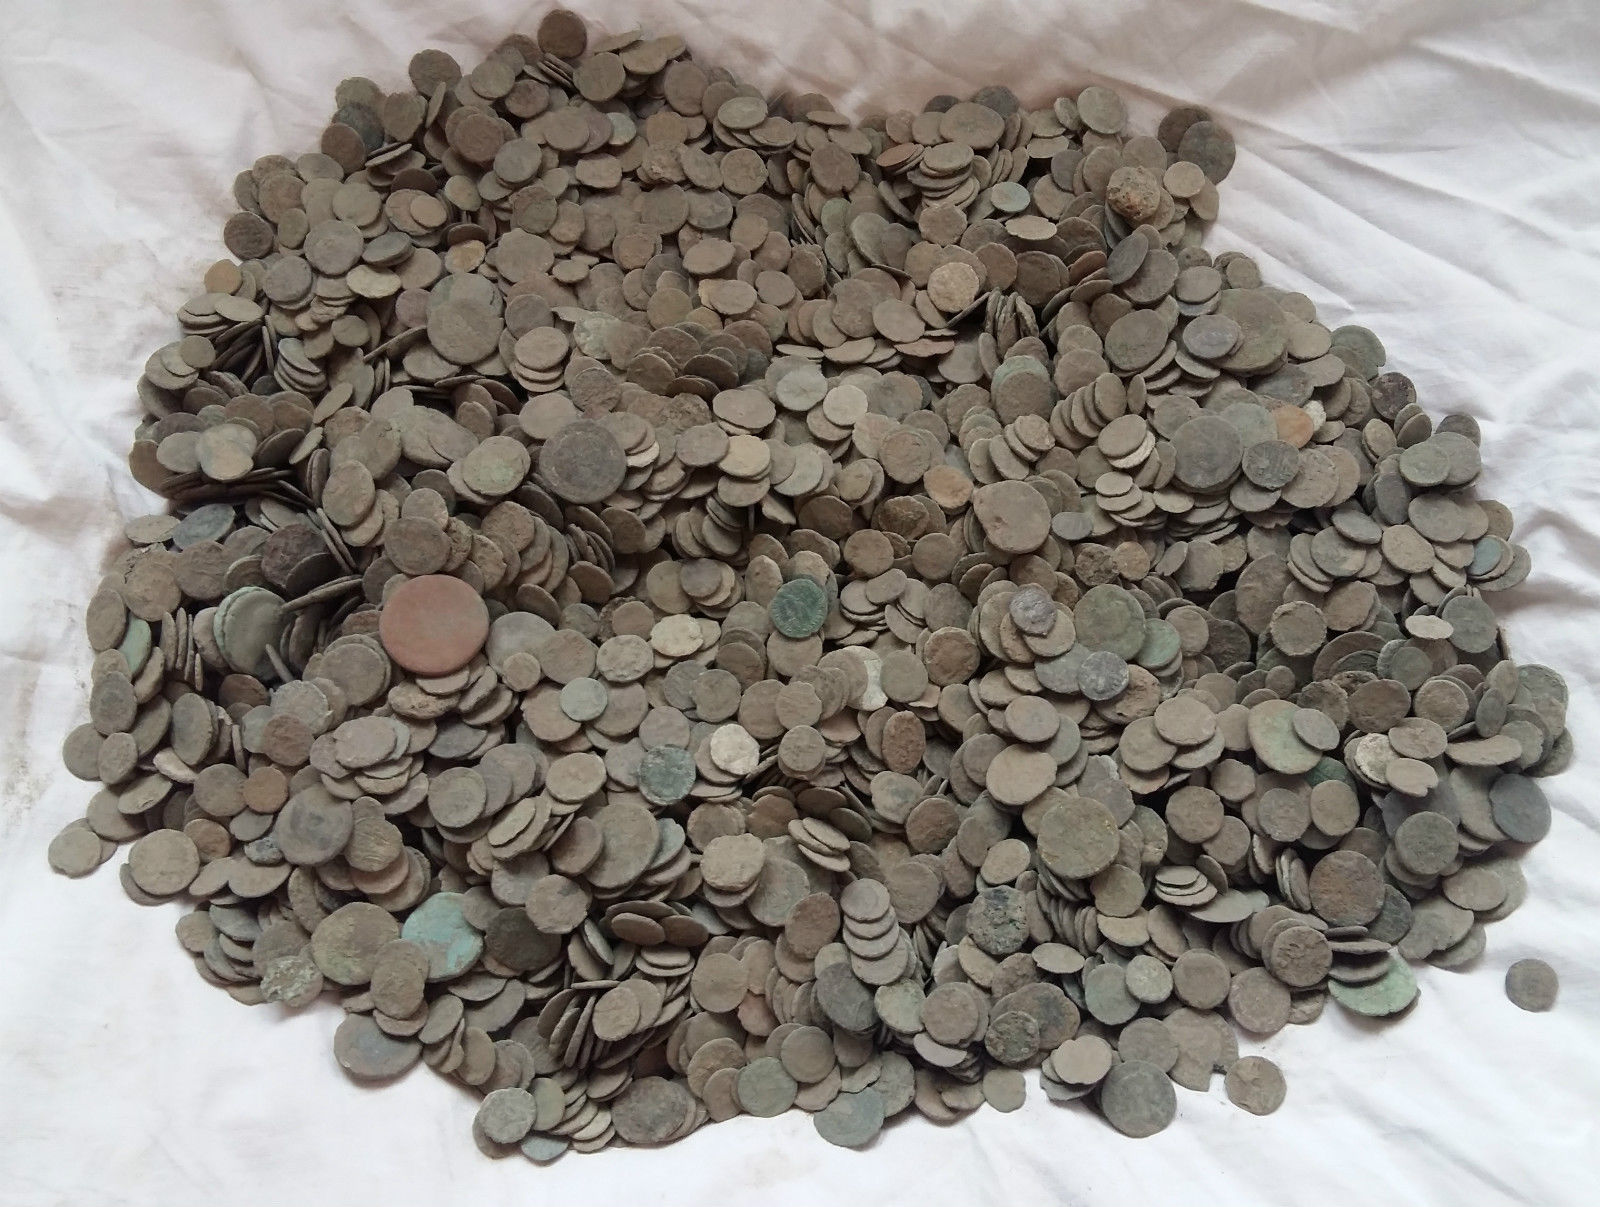 LOT OF 100 pcs UNCLEANED ROMAN COINS AE1, AE2, AE3 AND AE4